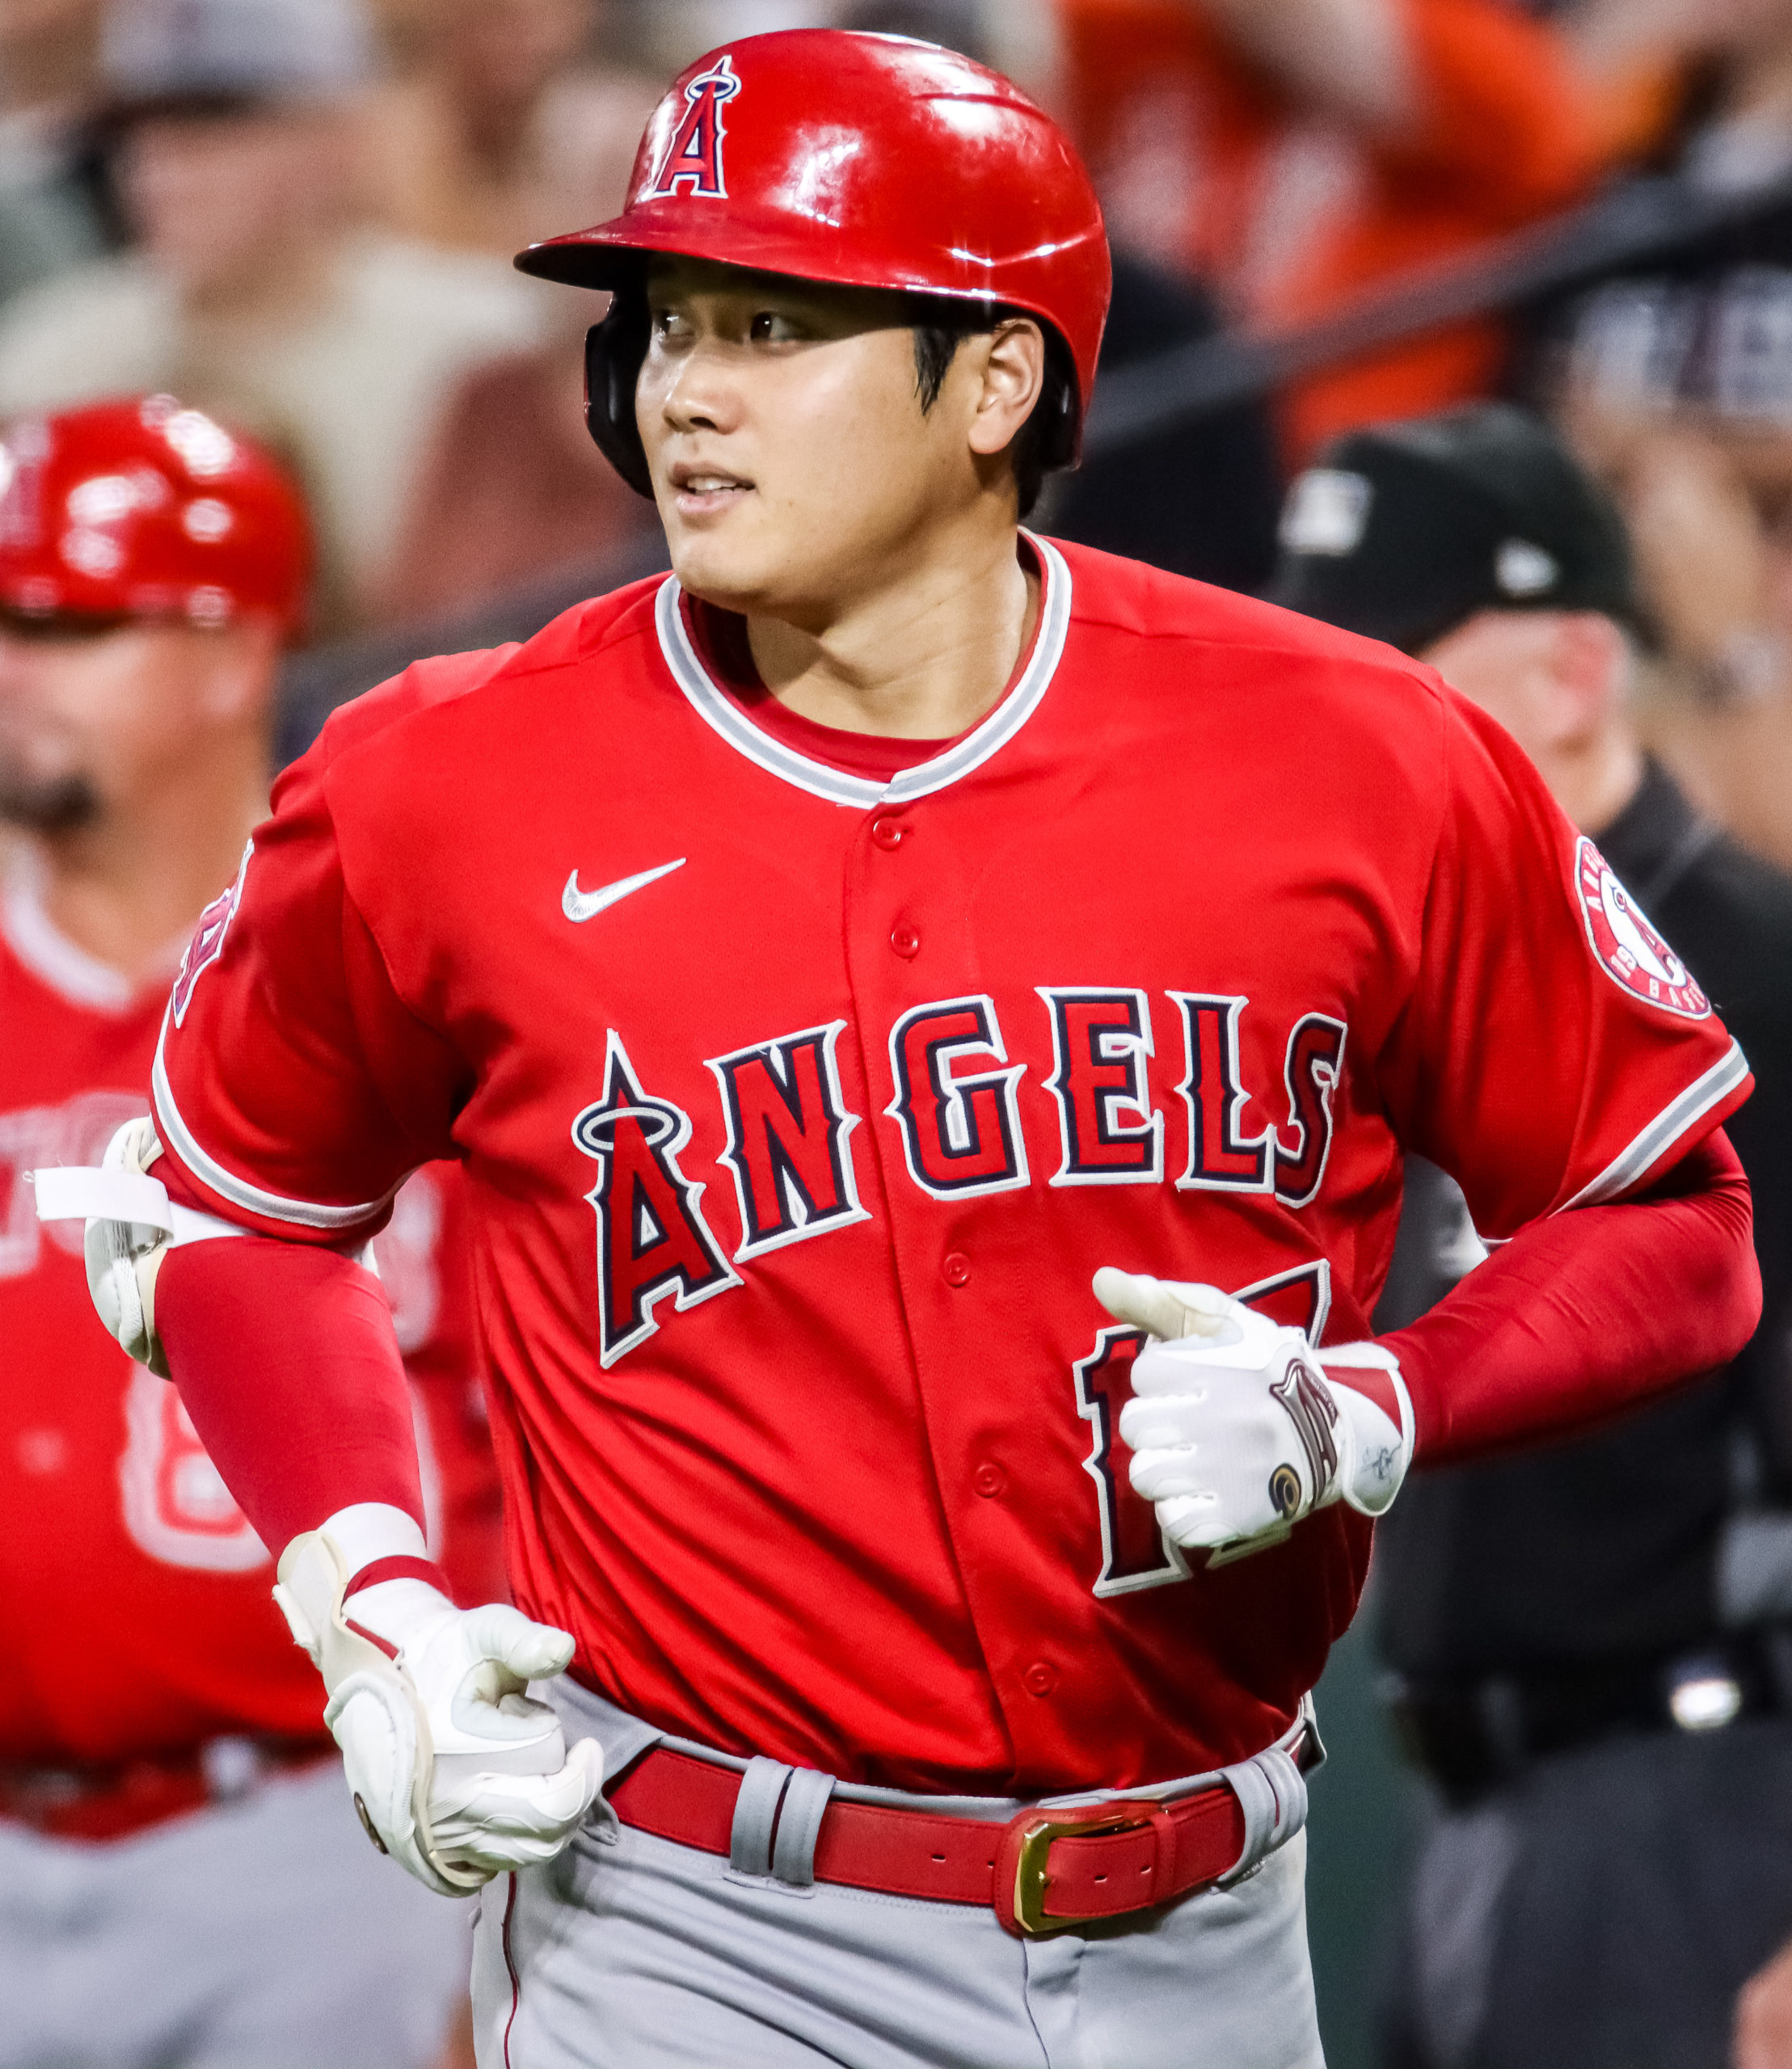 After a stellar performance in the World Baseball Classic, will Shohei Ohtani be able to bring home hardware at the end of the season?